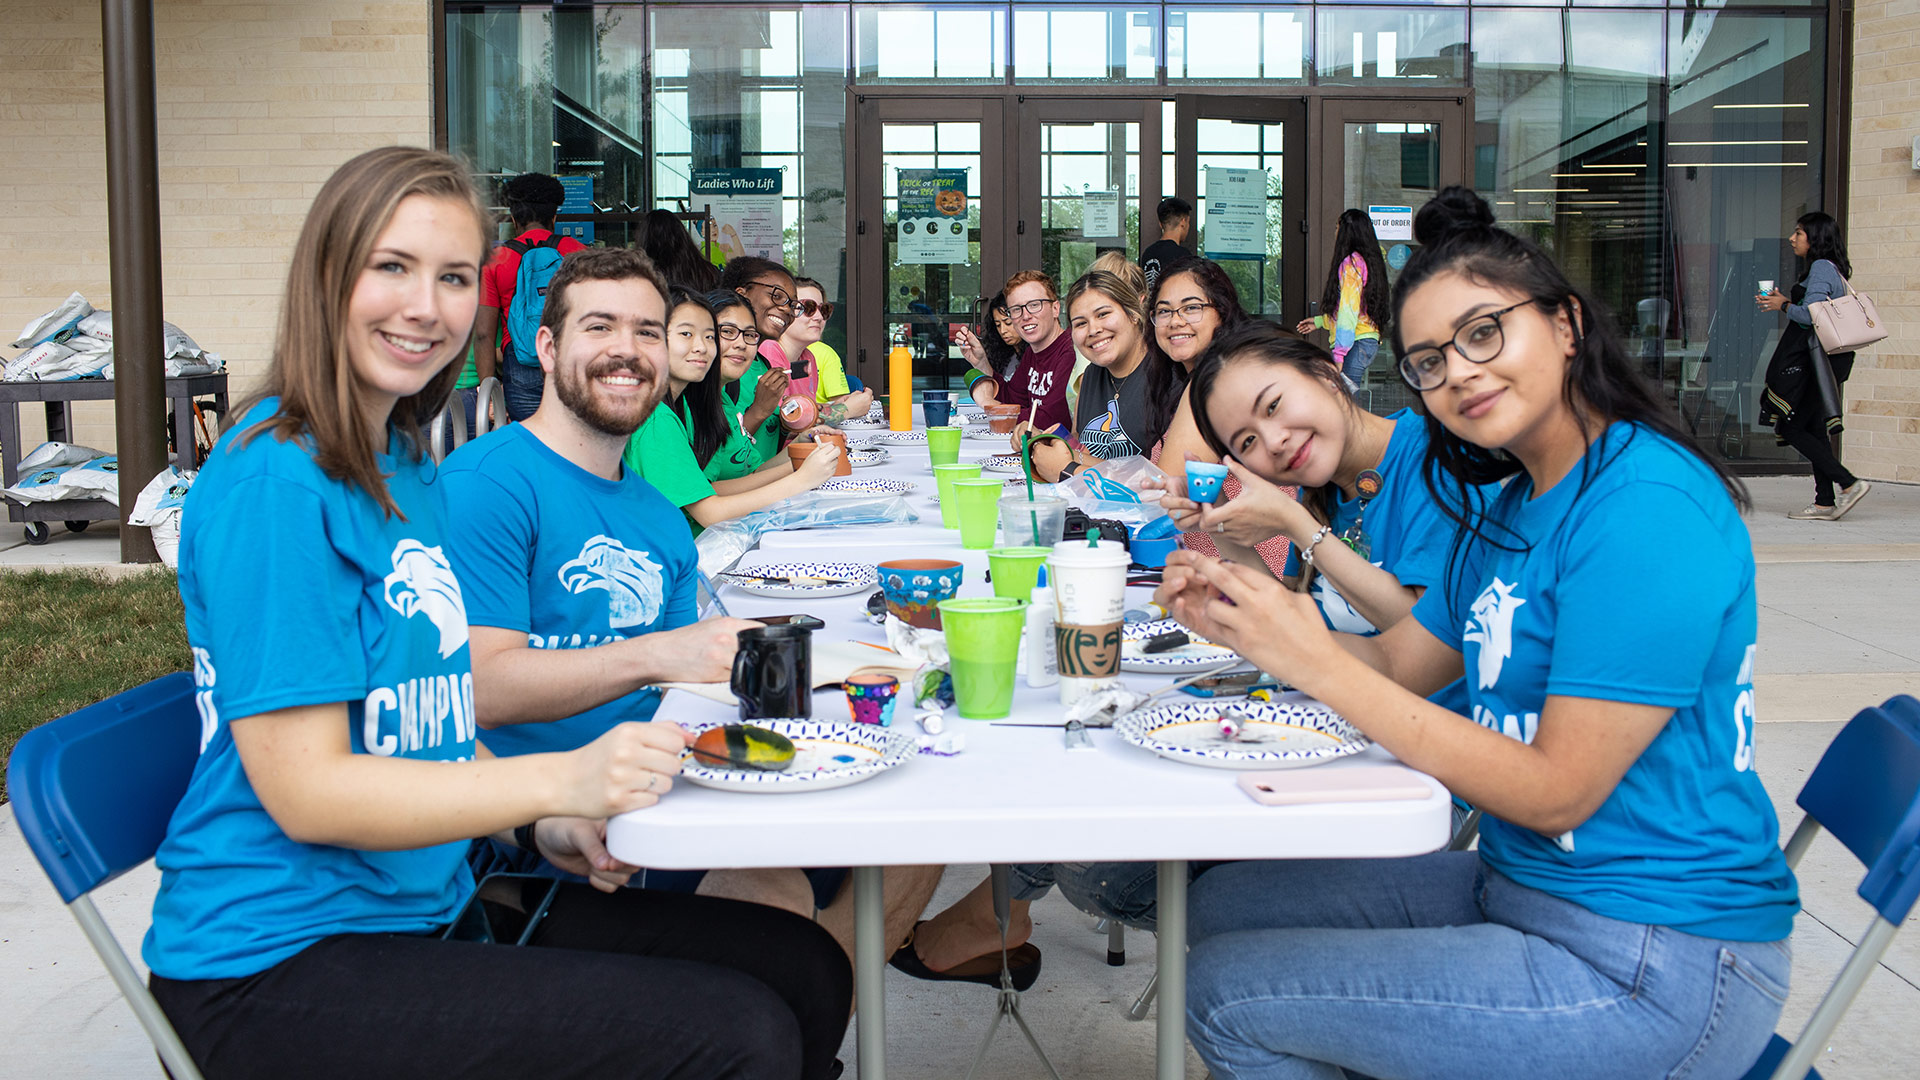 Students in blue UHCL shirts gathered at a Student Affairs activity table outside the Recreation and Wellness Center